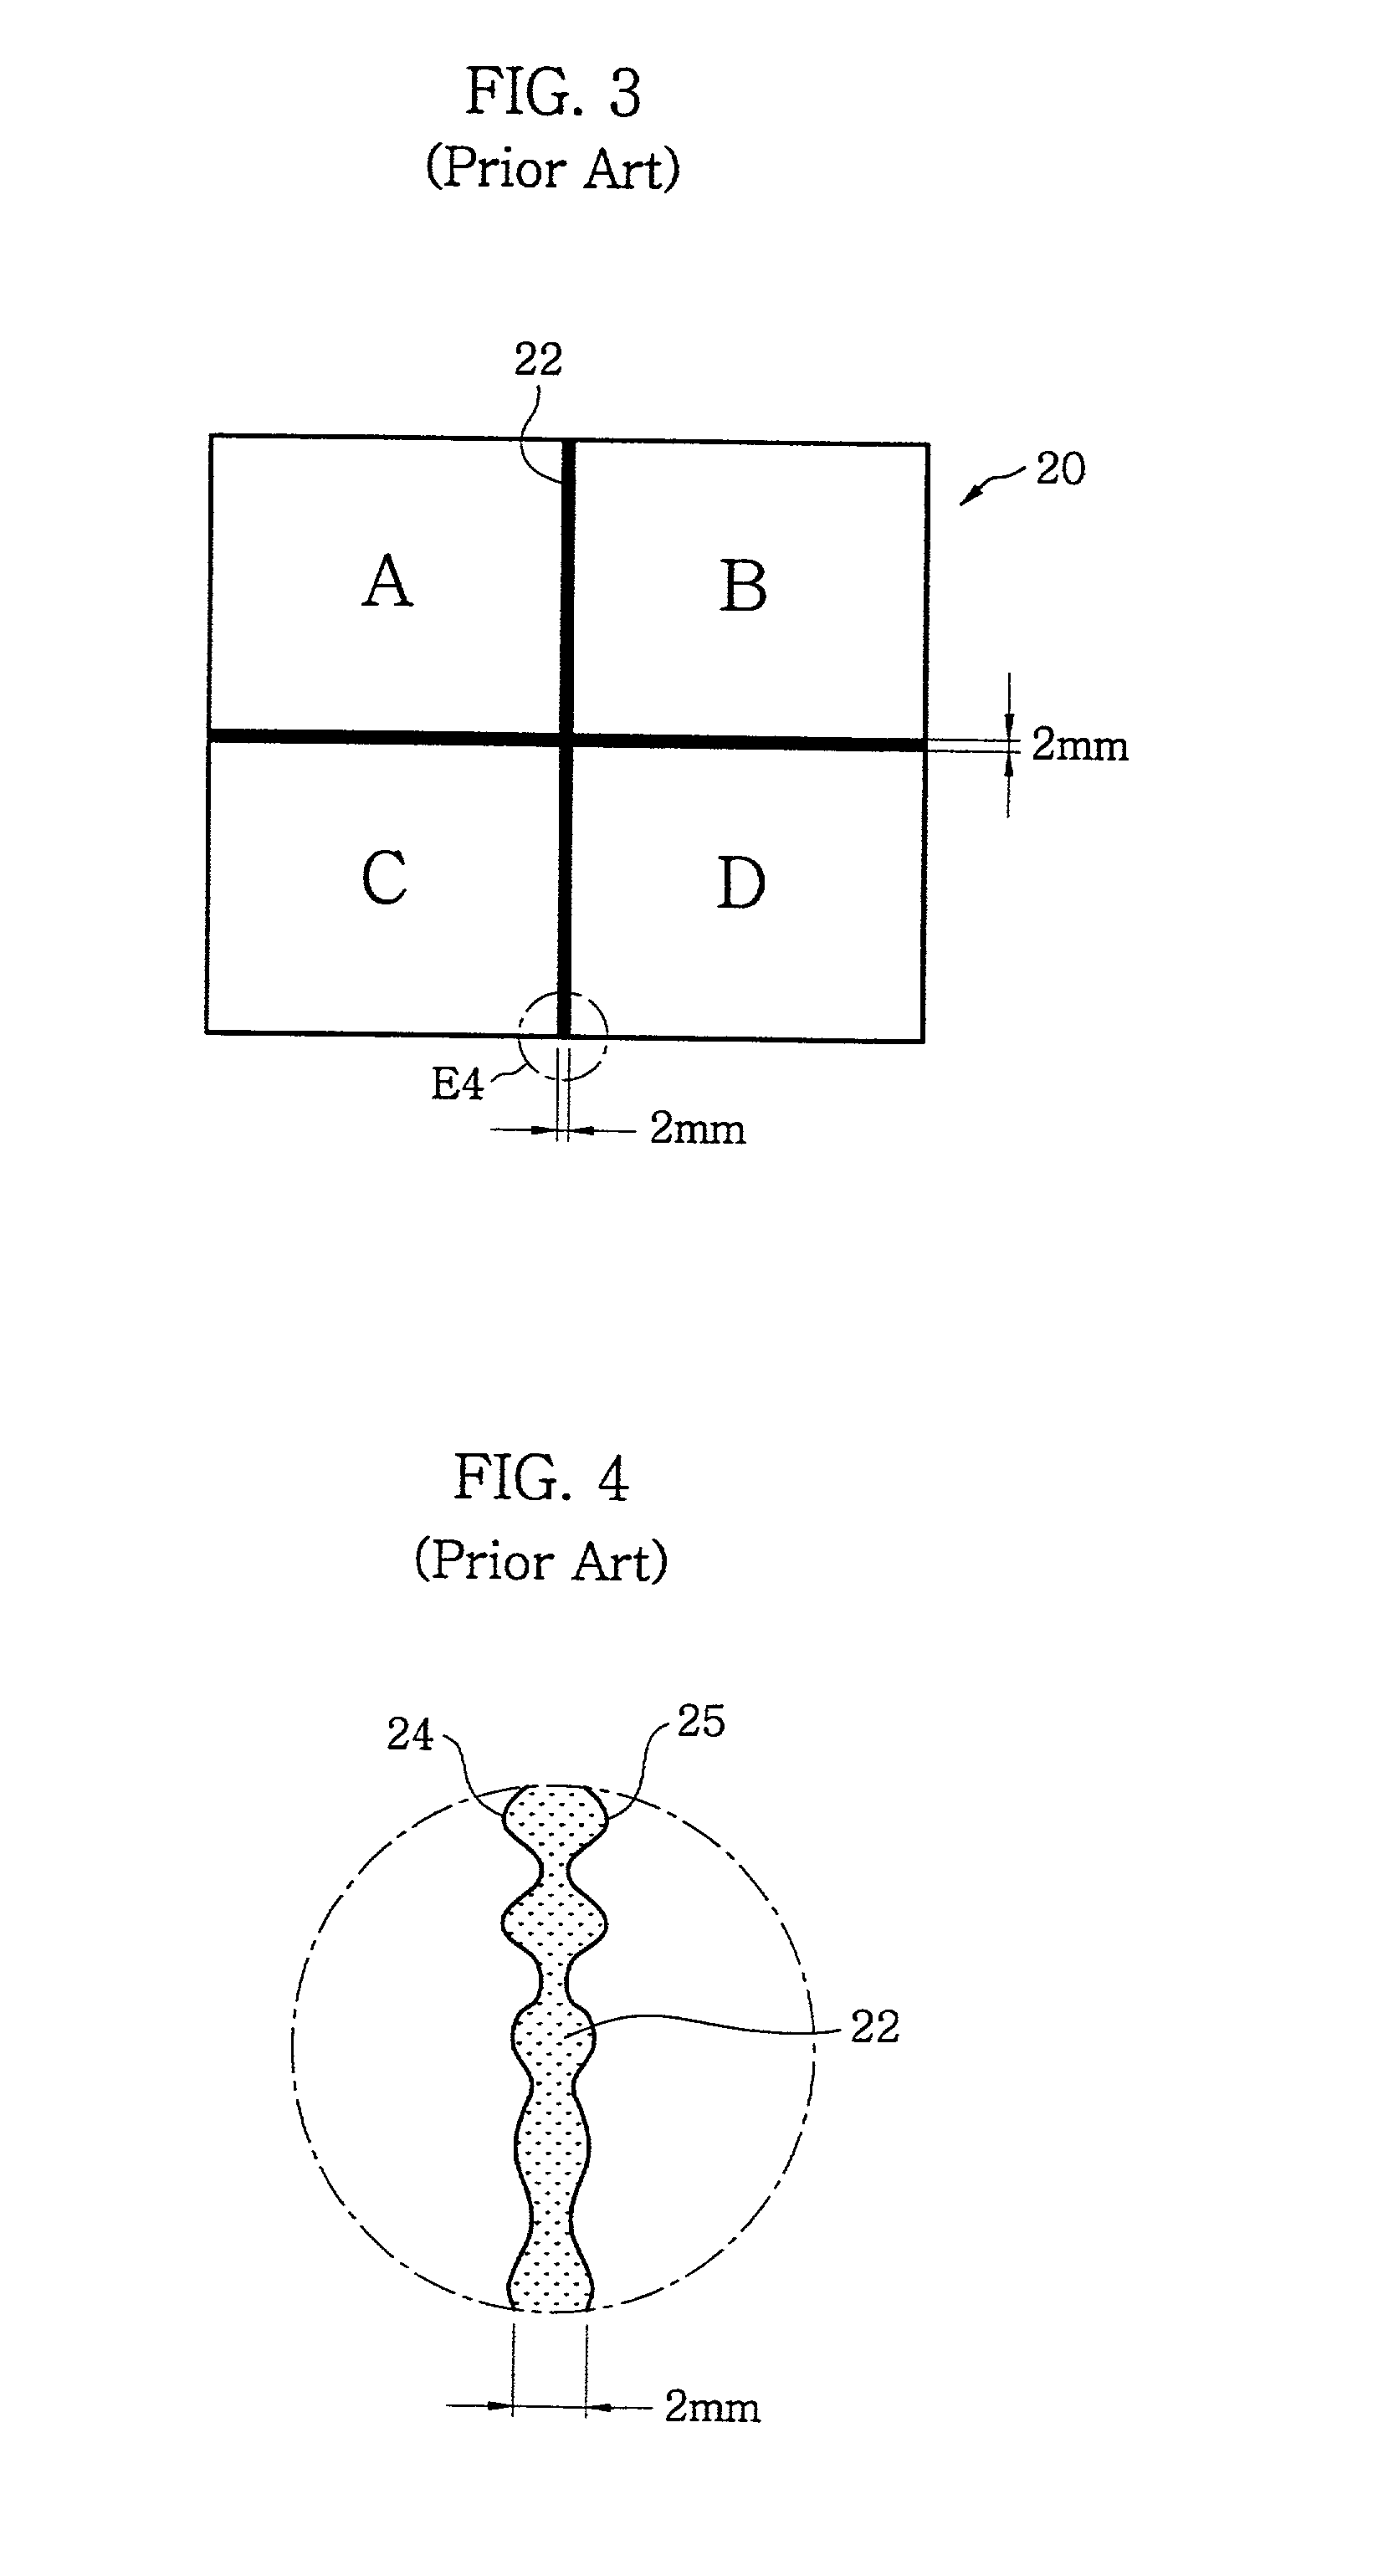 Laser cutting apparatus and method